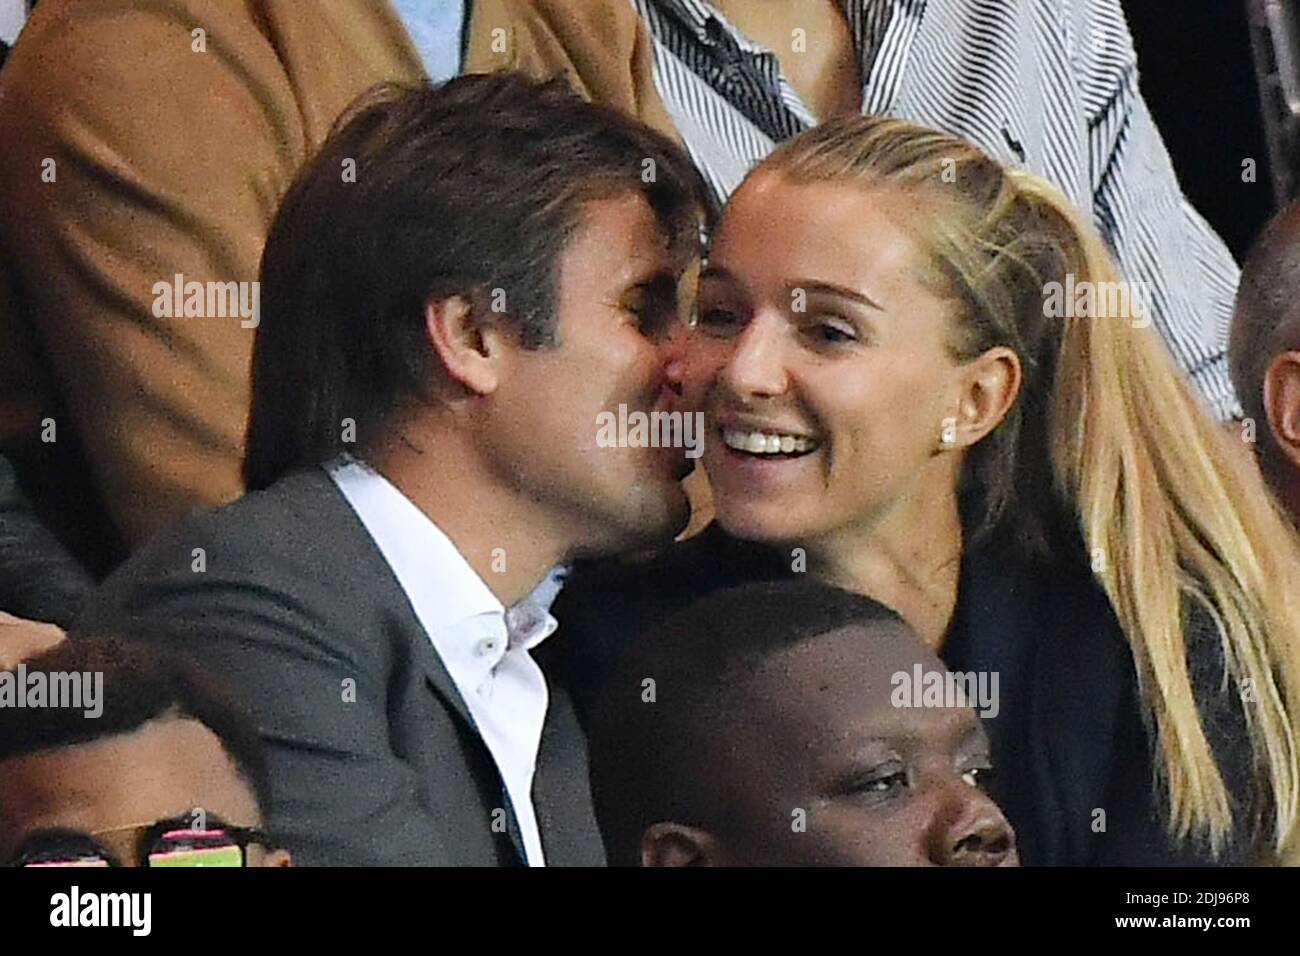 French former tennis player Fabrice Santoro and his wife attend the French  Ligue 1 game between Paris Saint-Germain and Dijon FCO at Parc des Princes  on September 20, 2016 in Paris, France.